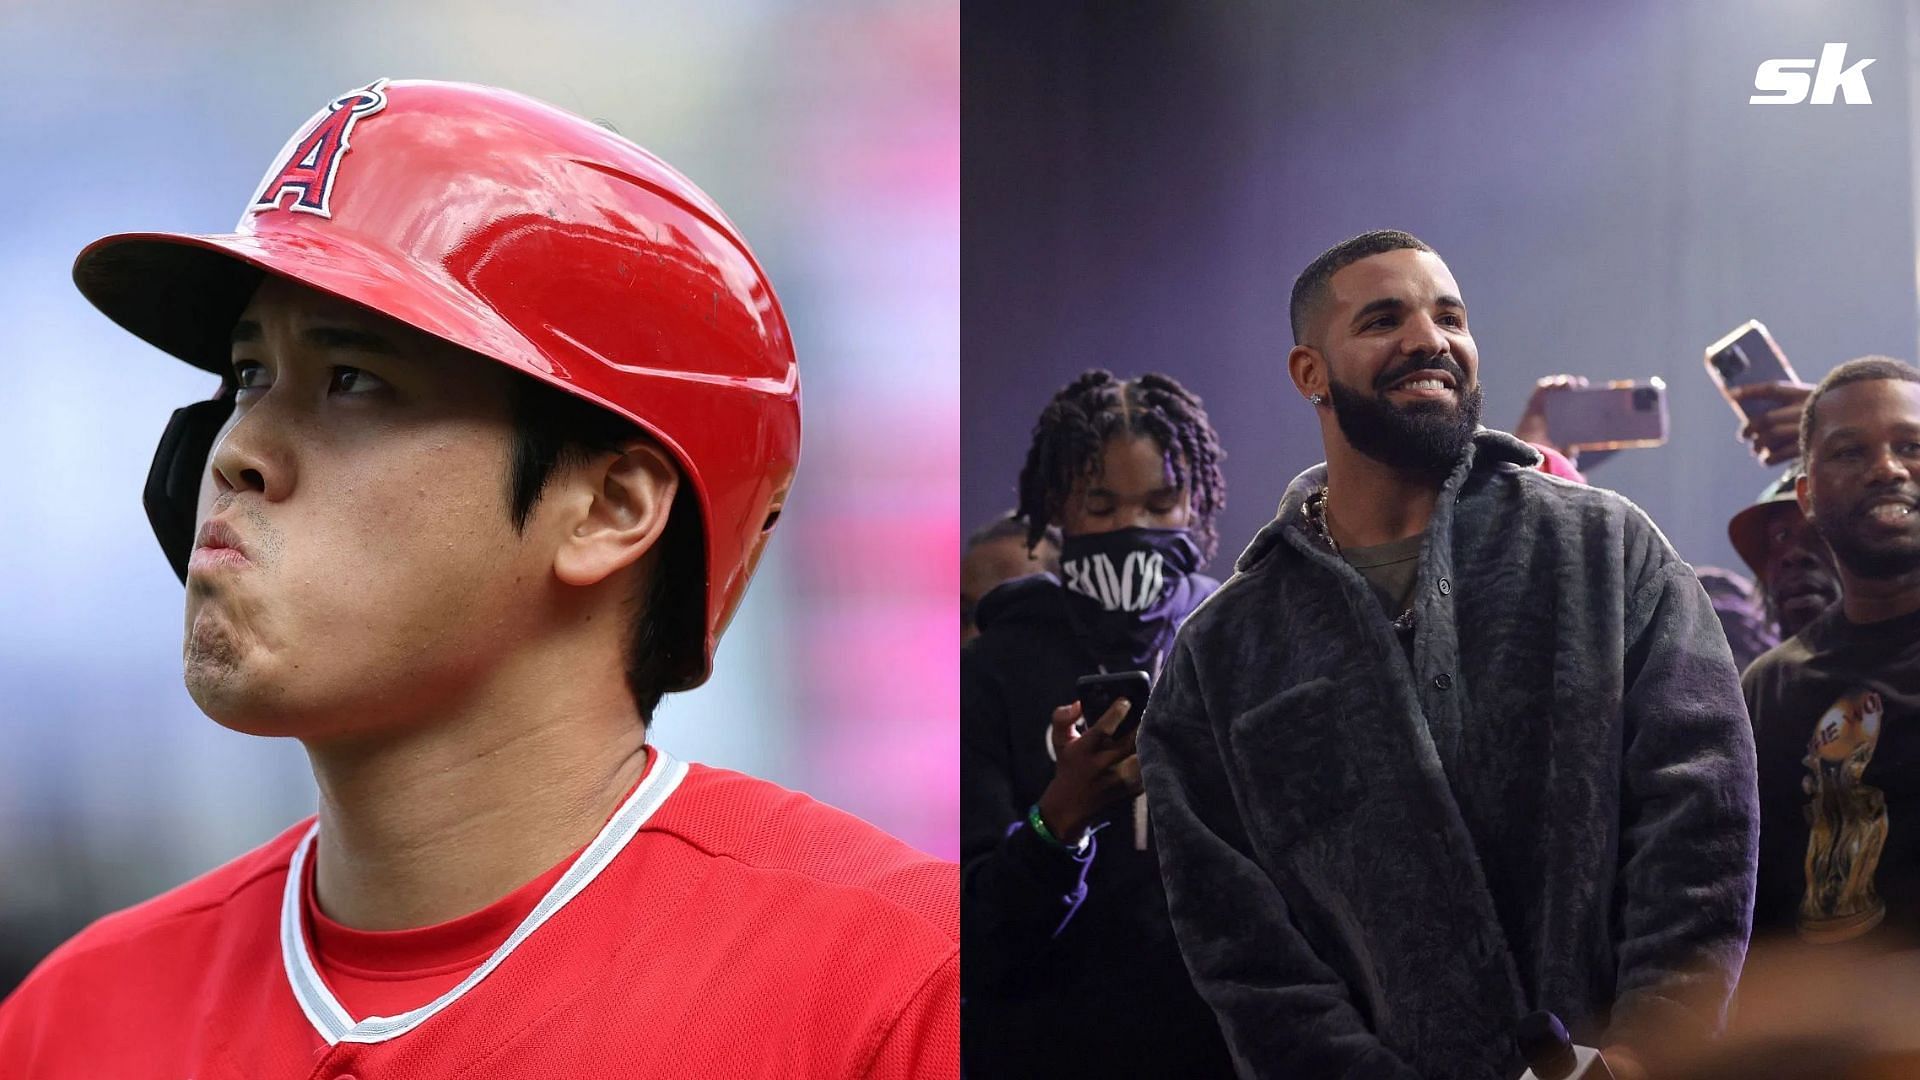 [Photo] Drake reignites frenzy by donning Shohei Ohtani Jersey amid Toronto Blue Jays speculation